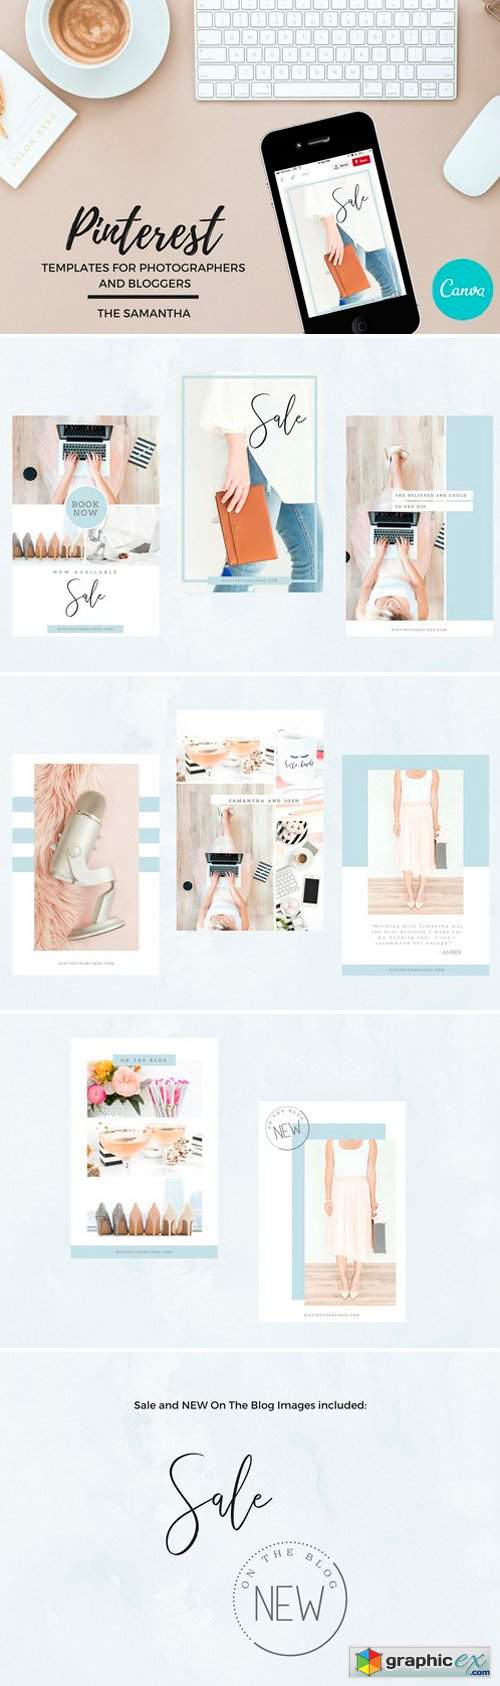 pinterest-templates-for-canva-free-download-vector-stock-image